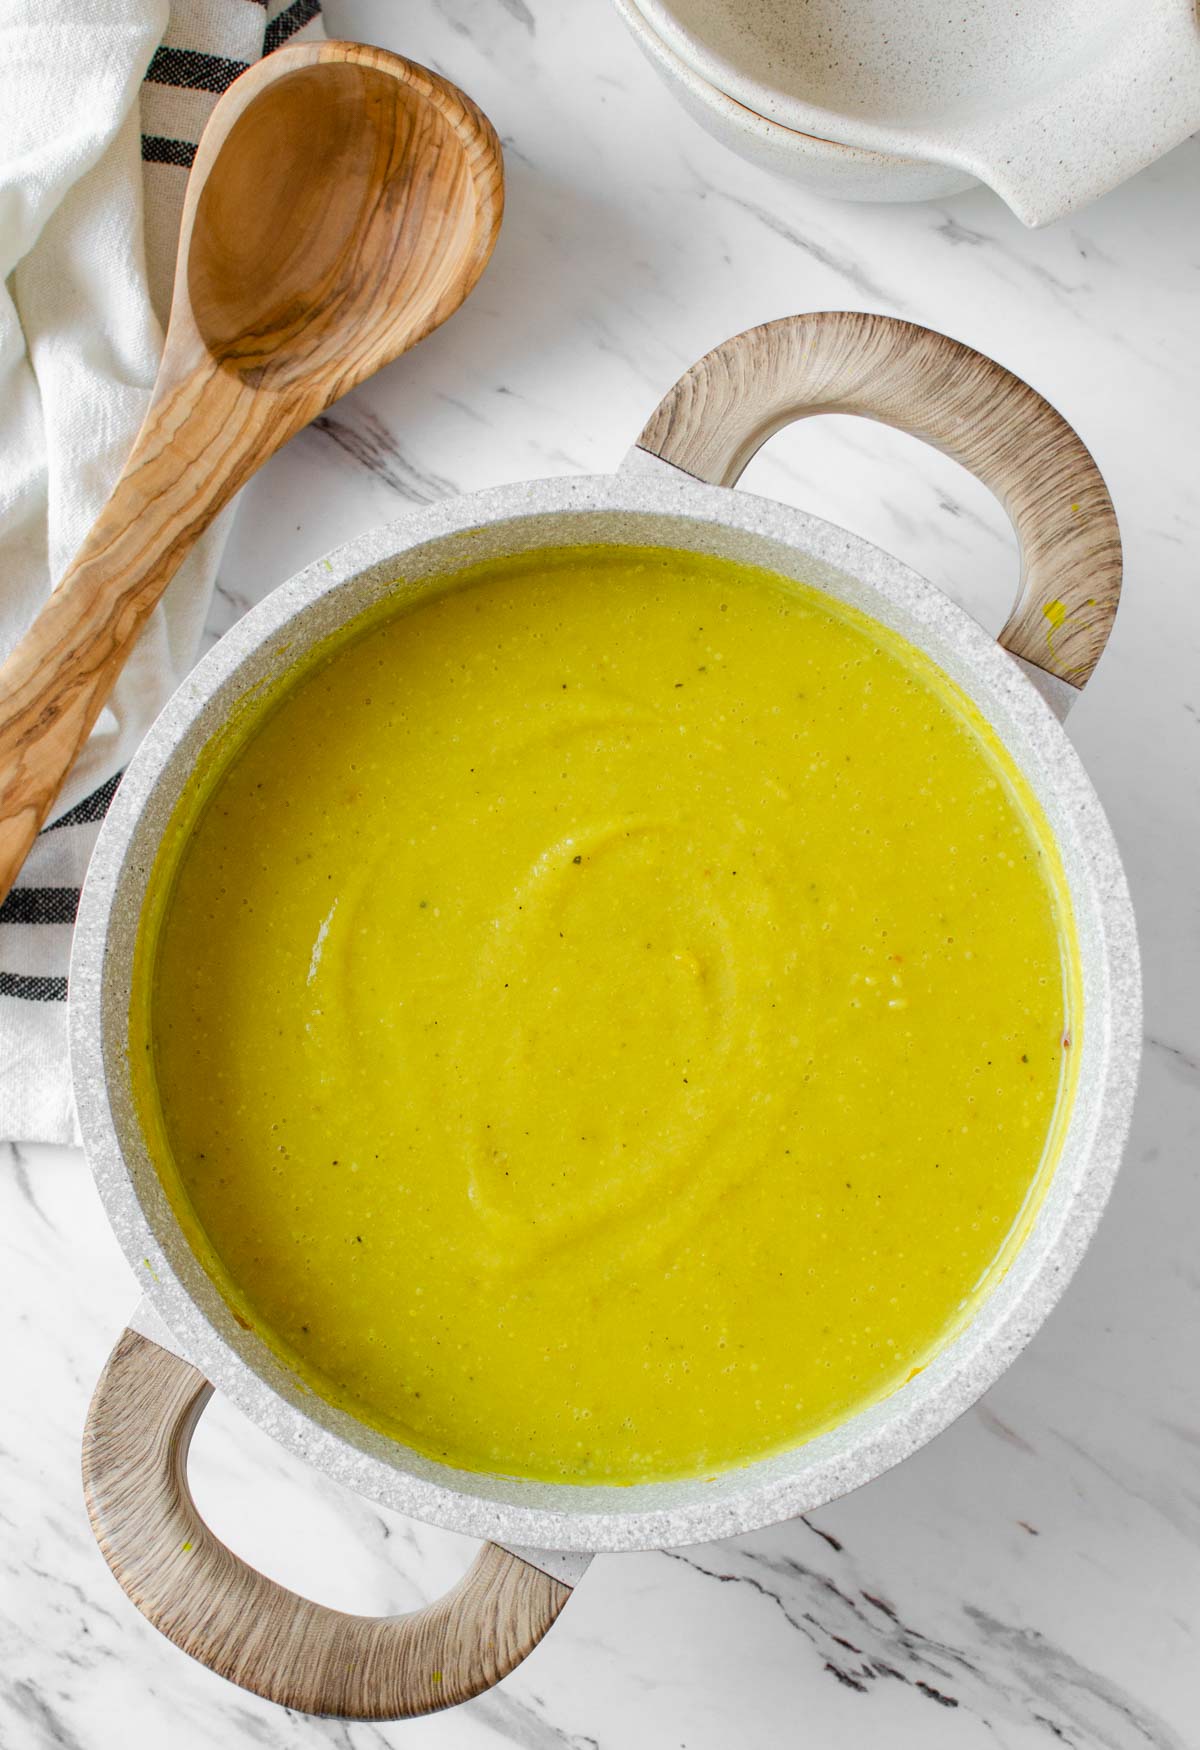 Roast fresh cauliflower florets in the oven and turn them into this amazing roasted turmeric cauliflower soup. Perfect cold-night easy golden healthy soup to get the warmth. 